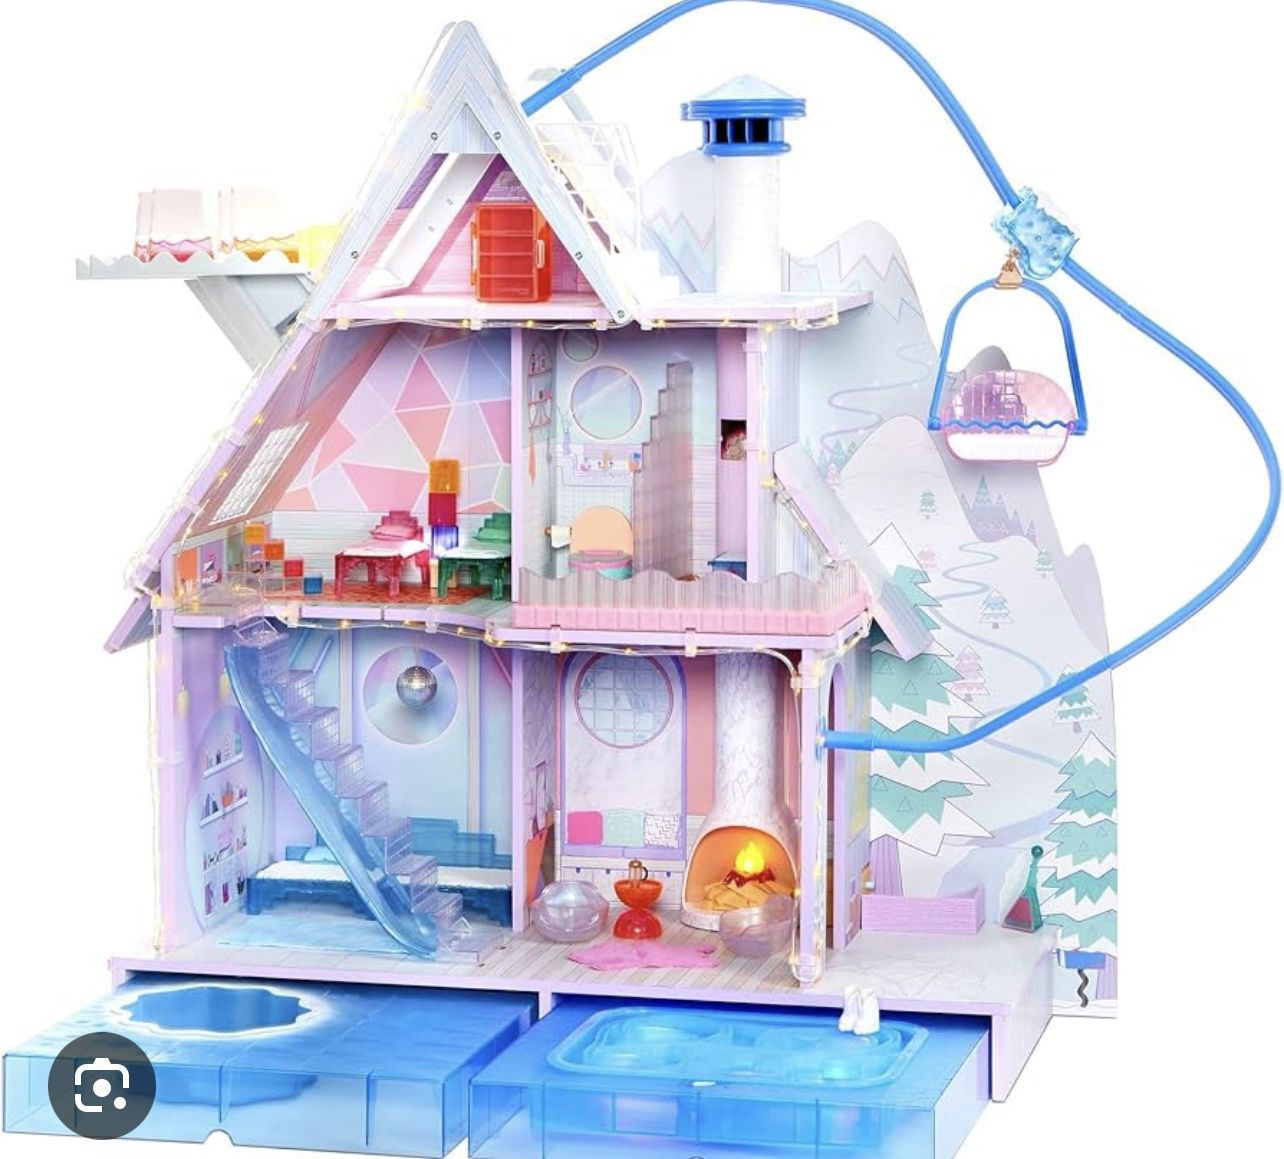 LoL Doll Chalet Only Reduced To $10